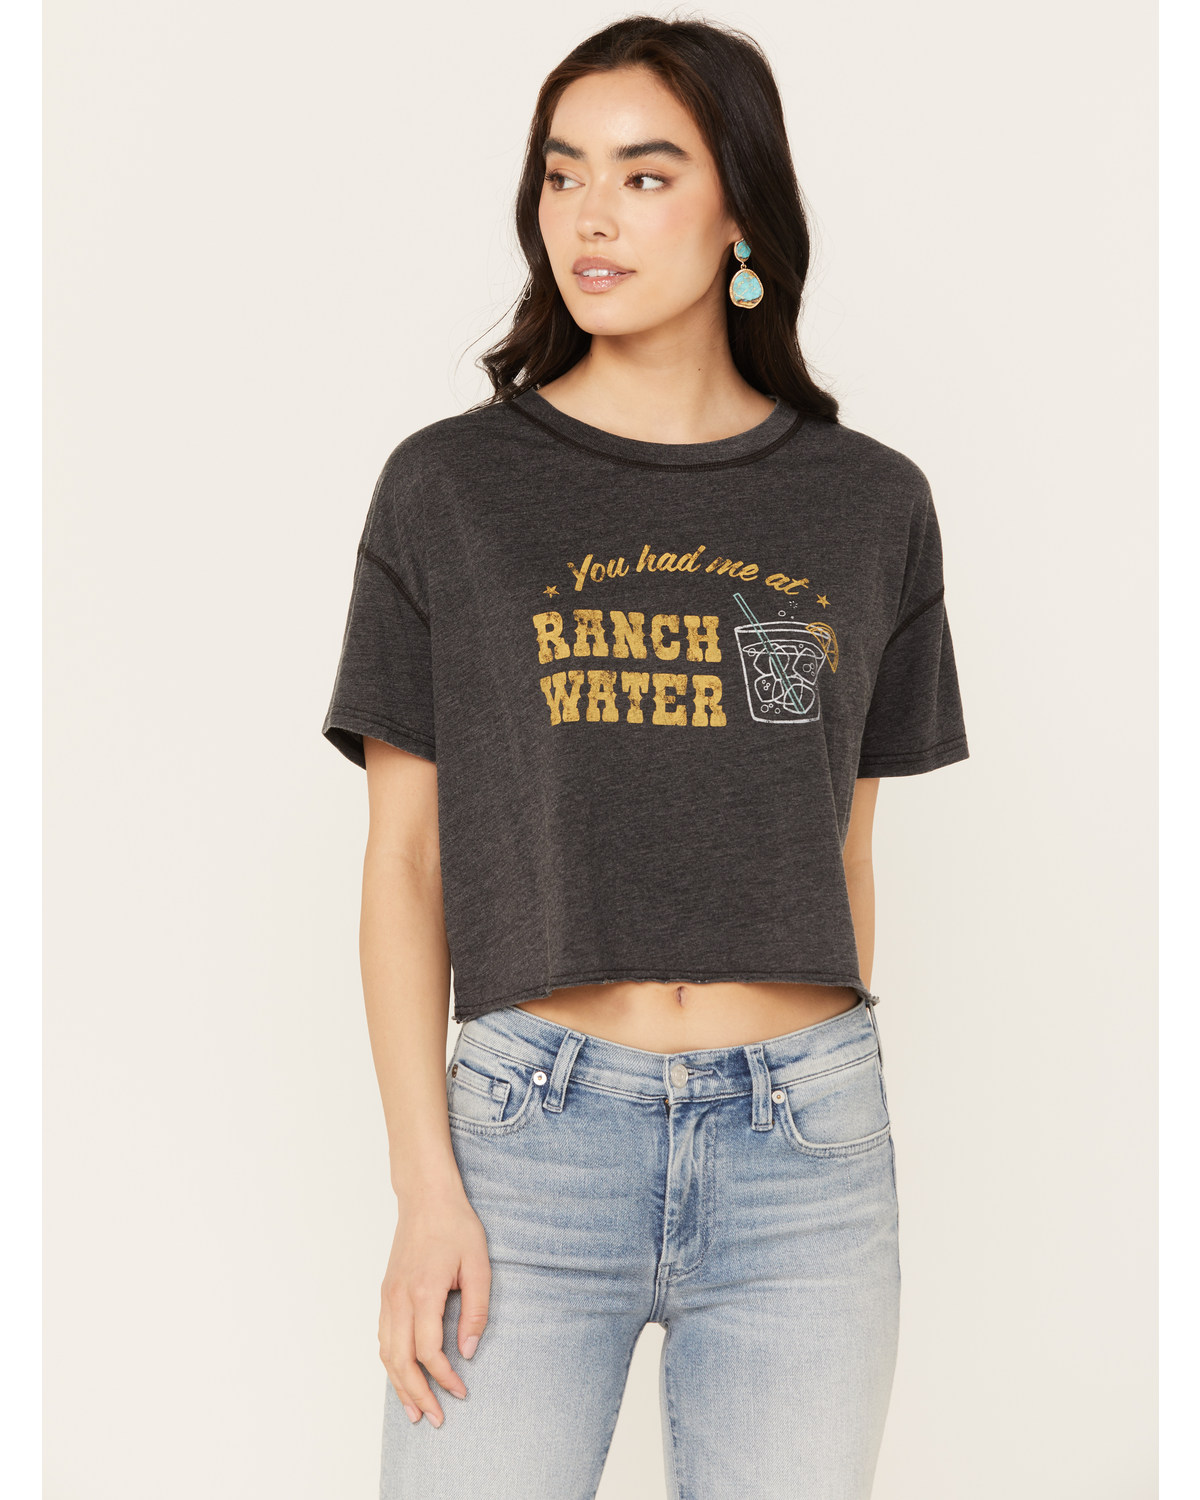 White Crow Women's You Had Me At Ranch Water Short Sleeve Cropped Graphic Tee